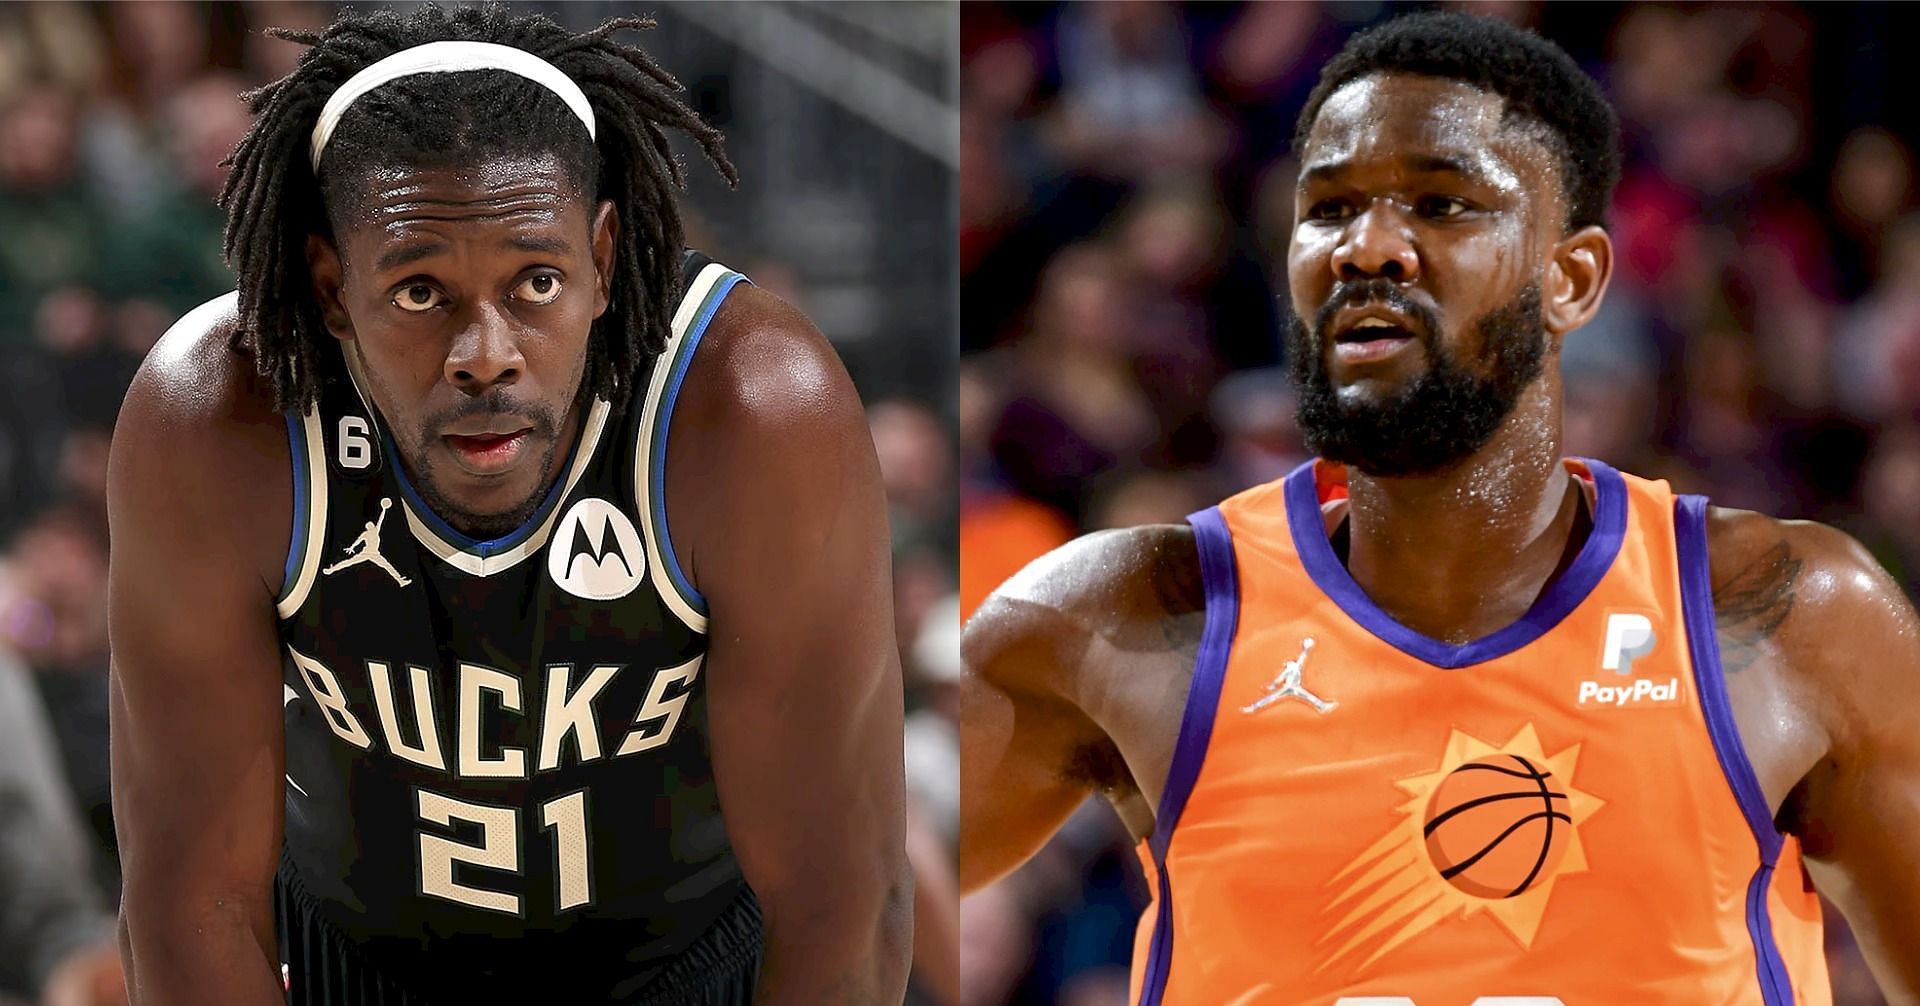 Newly acquired Portland Trail Blazers players Jrue Holiday and Deandre Ayton